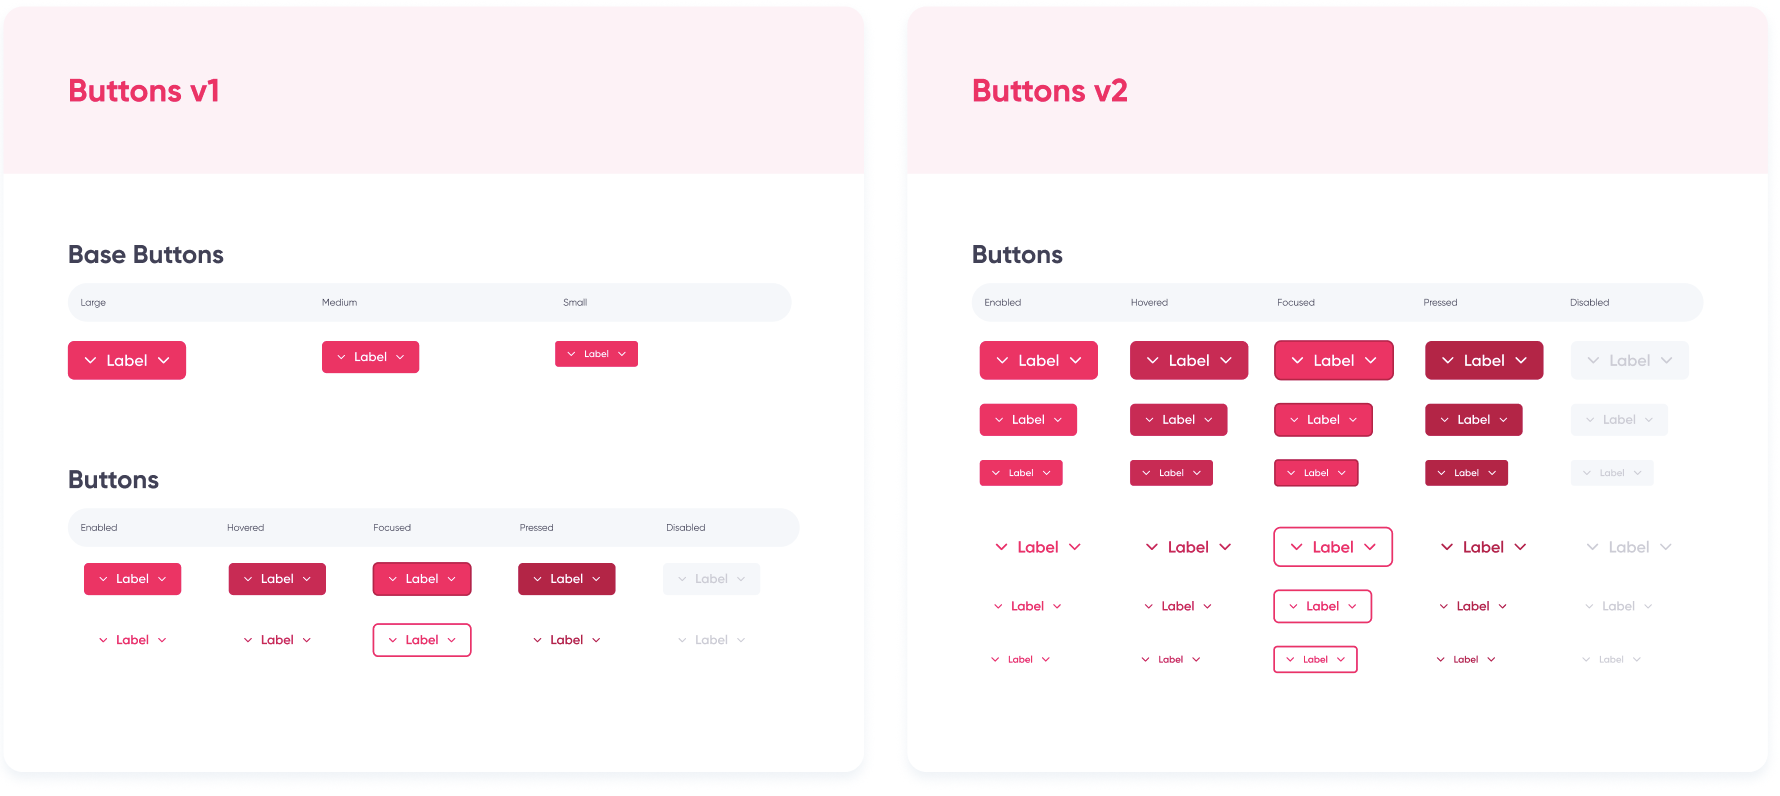 Using a base button to handle button sizes and then customizing it for the different statuses and types allows you to downsize from 30 to 13 variants.